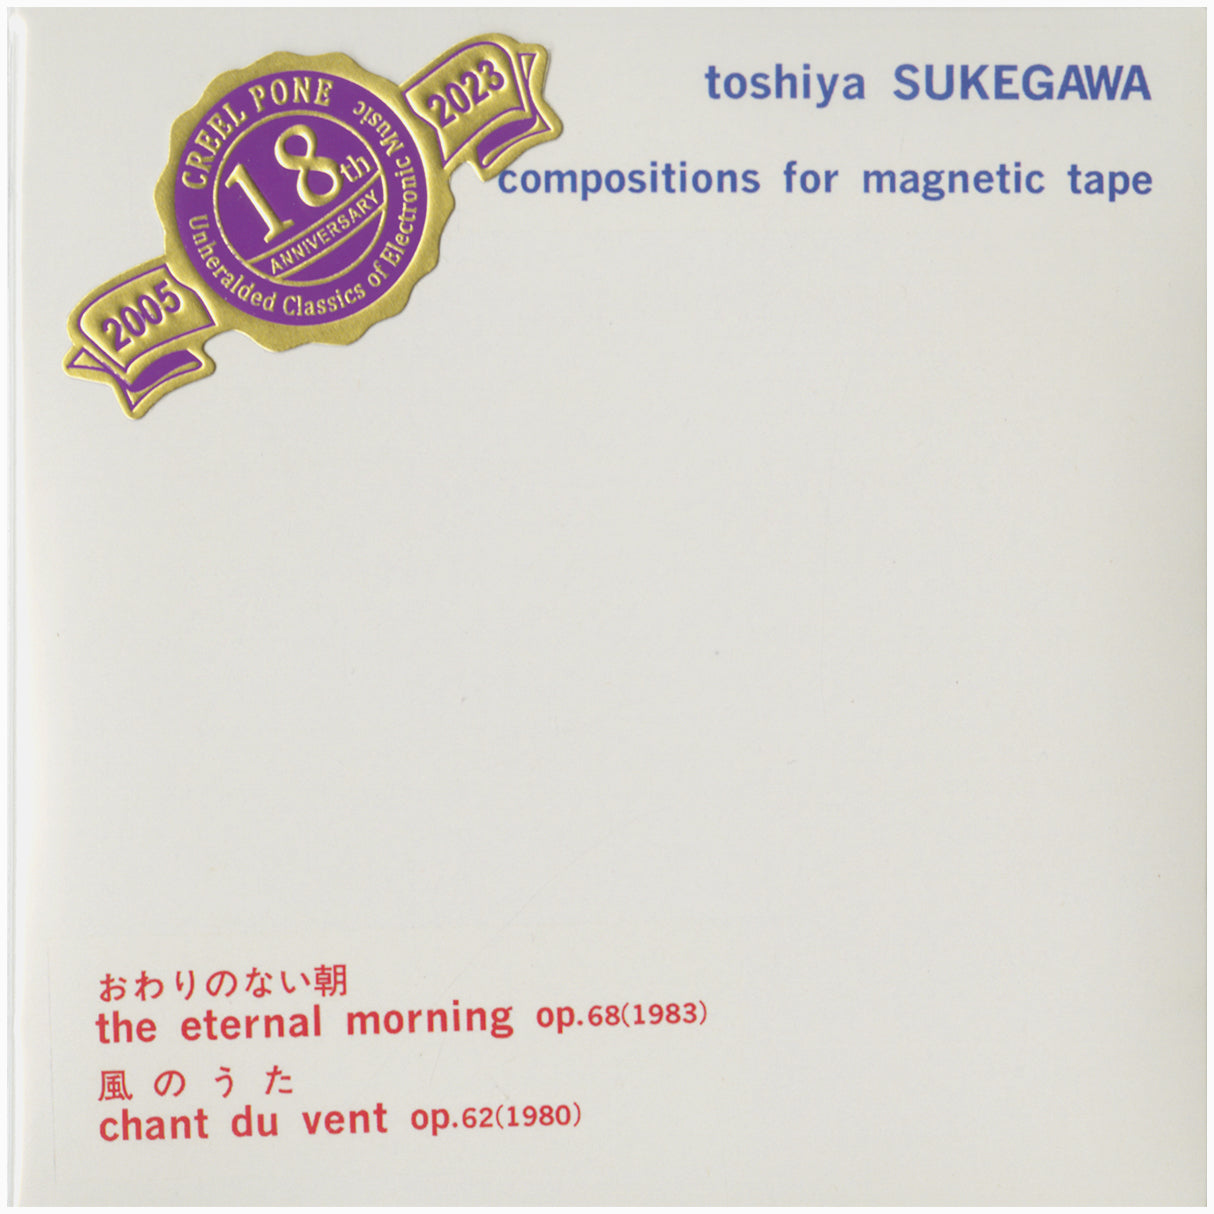 [CP 293 CD] Toshiya Sukegawa; Compositions For Magnetic Tape